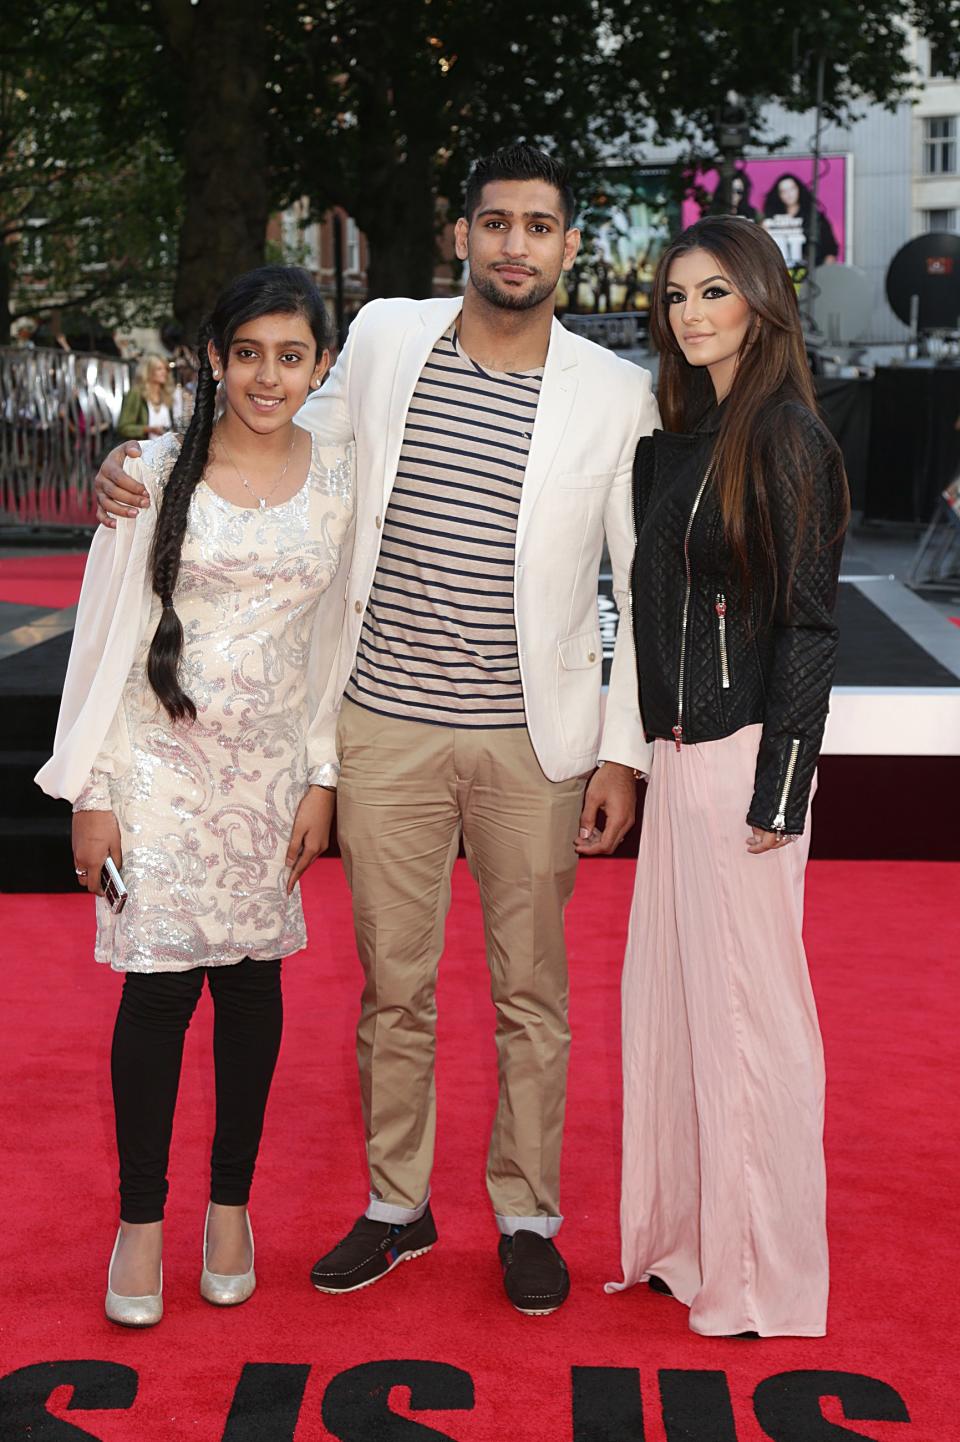 Amir Khan, (c) and Faryal Makhdoom (r) arriving for the World Premiere of One Direction: This Is Us, at the Empire Leicester Square, London.